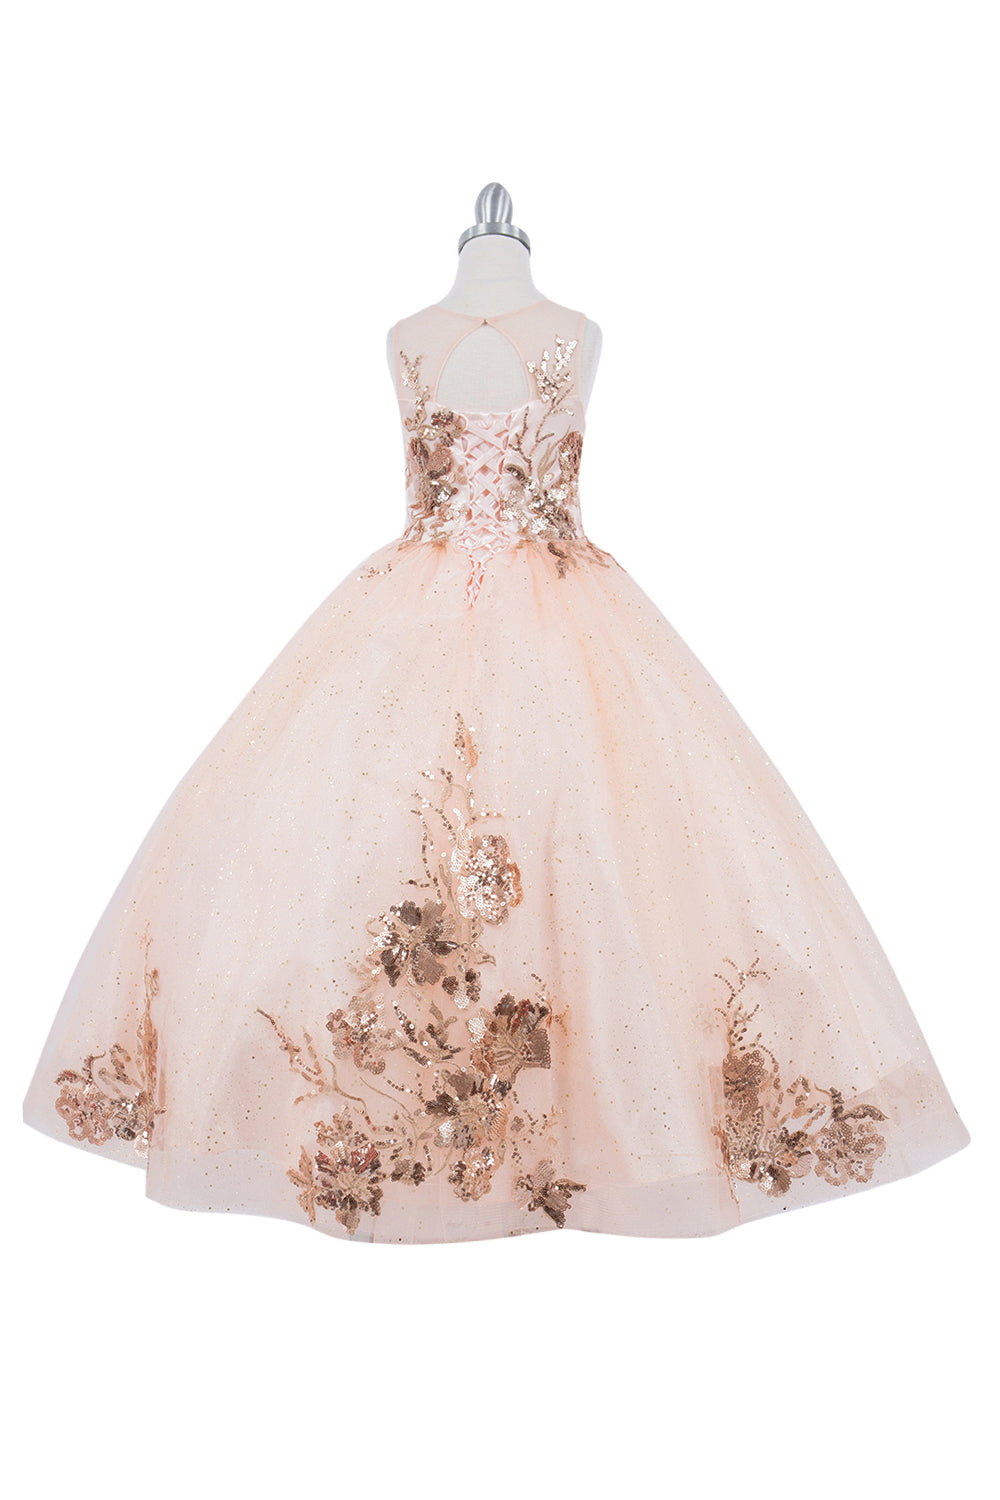 Embroidered Lace Corset Back Tulle Skirt Quinceanera Girl Dress CU5118X Elsy Style Kids Dress